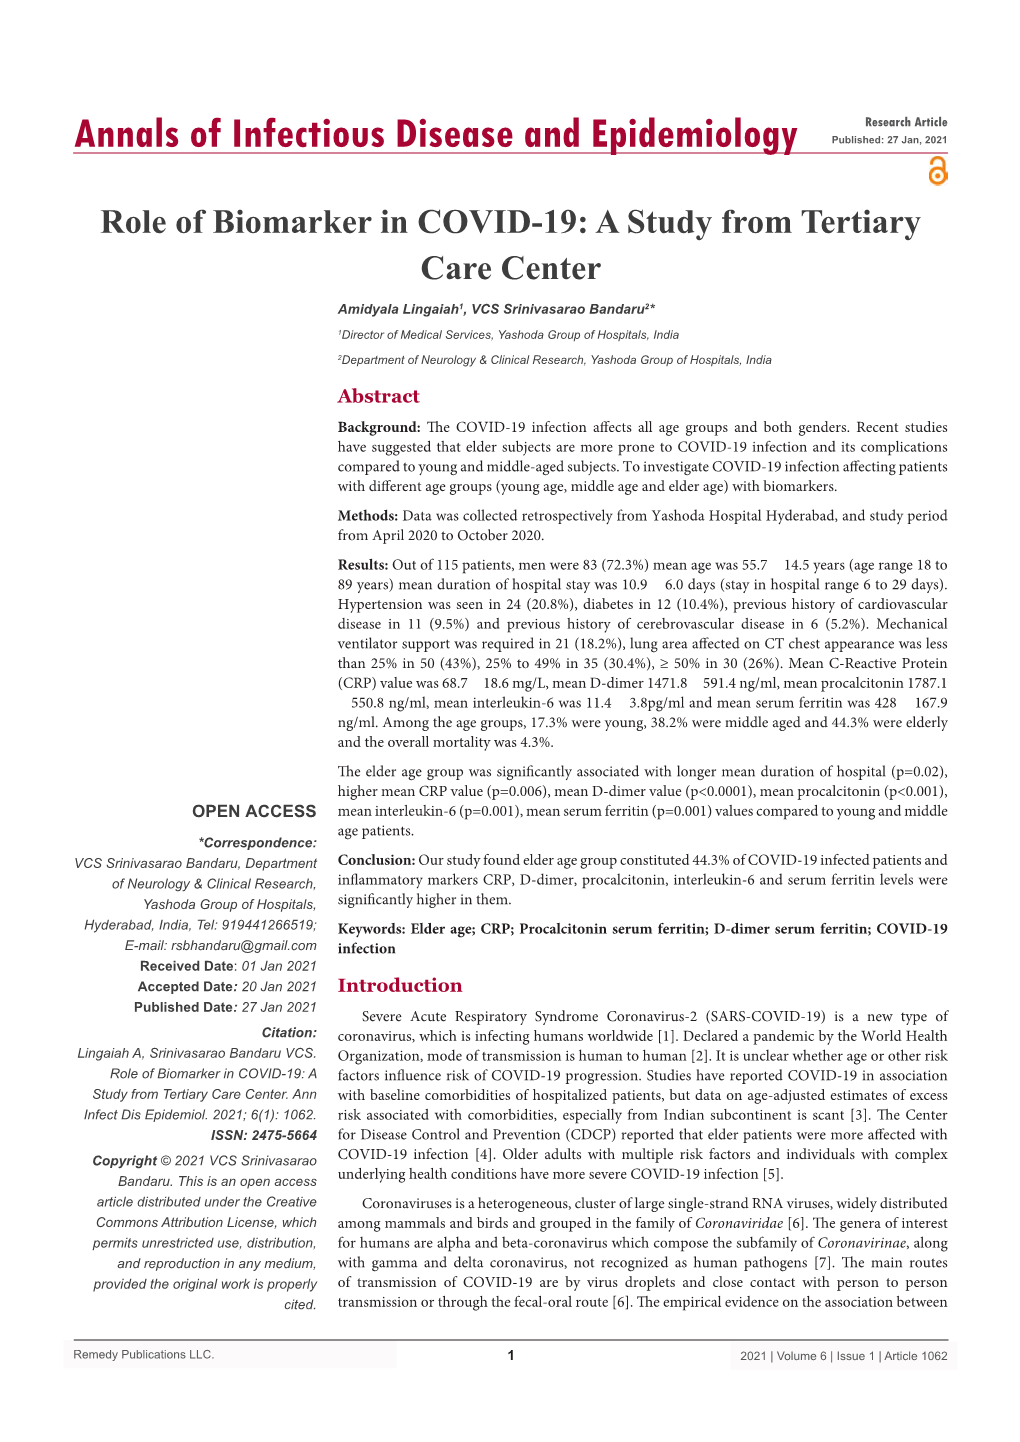 Role of Biomarker in COVID-19: a Study from Tertiary Care Center